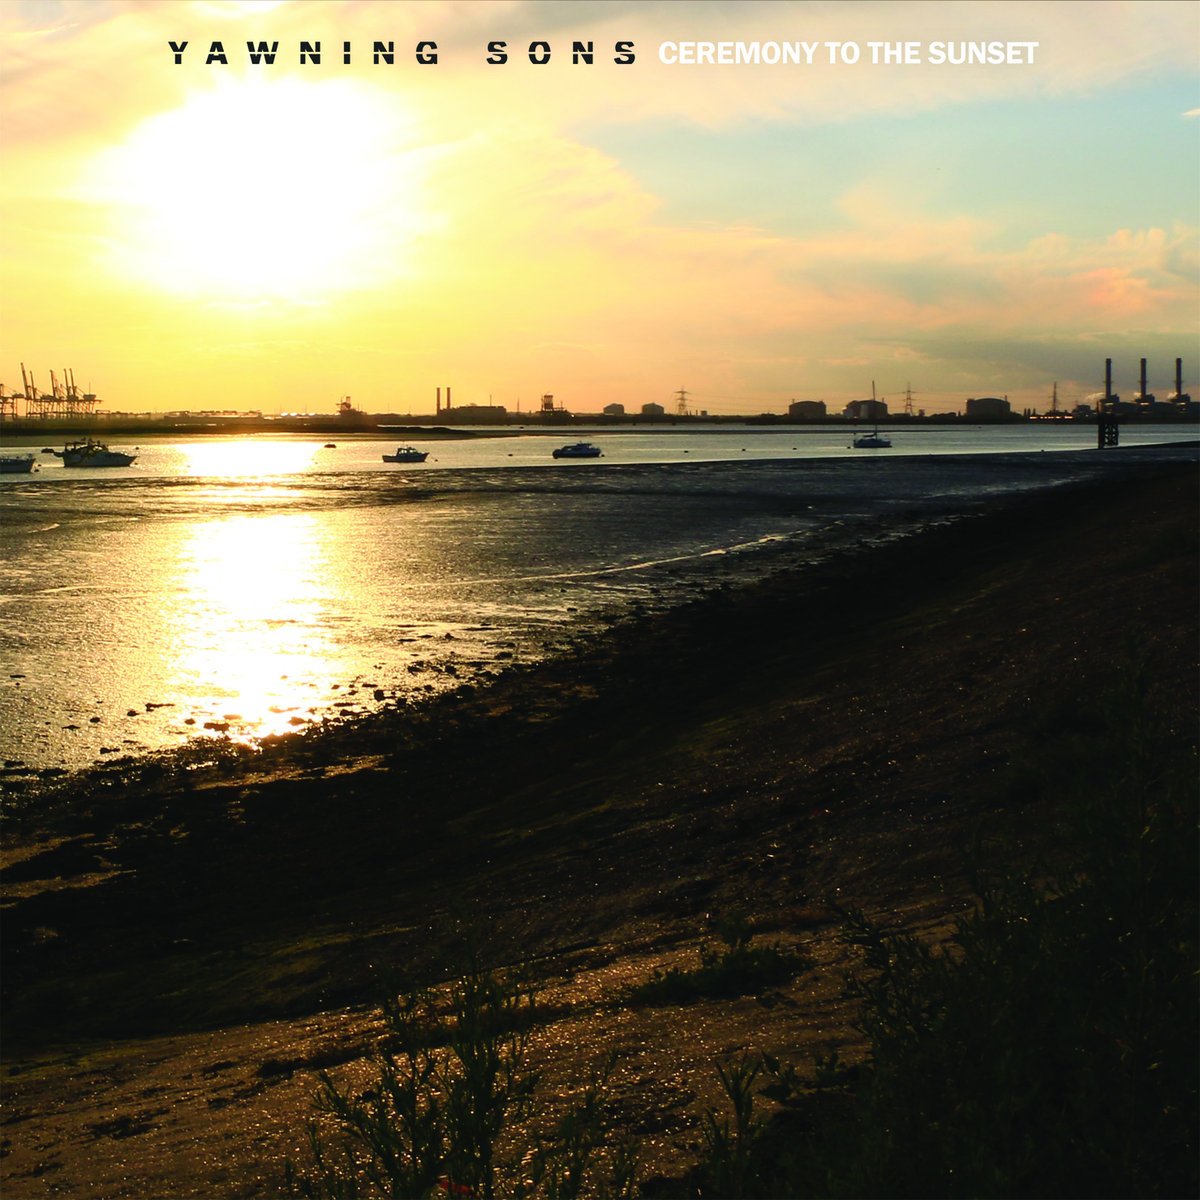 Yawning Sons - Ceremony to the Sunset (vinyl edition)